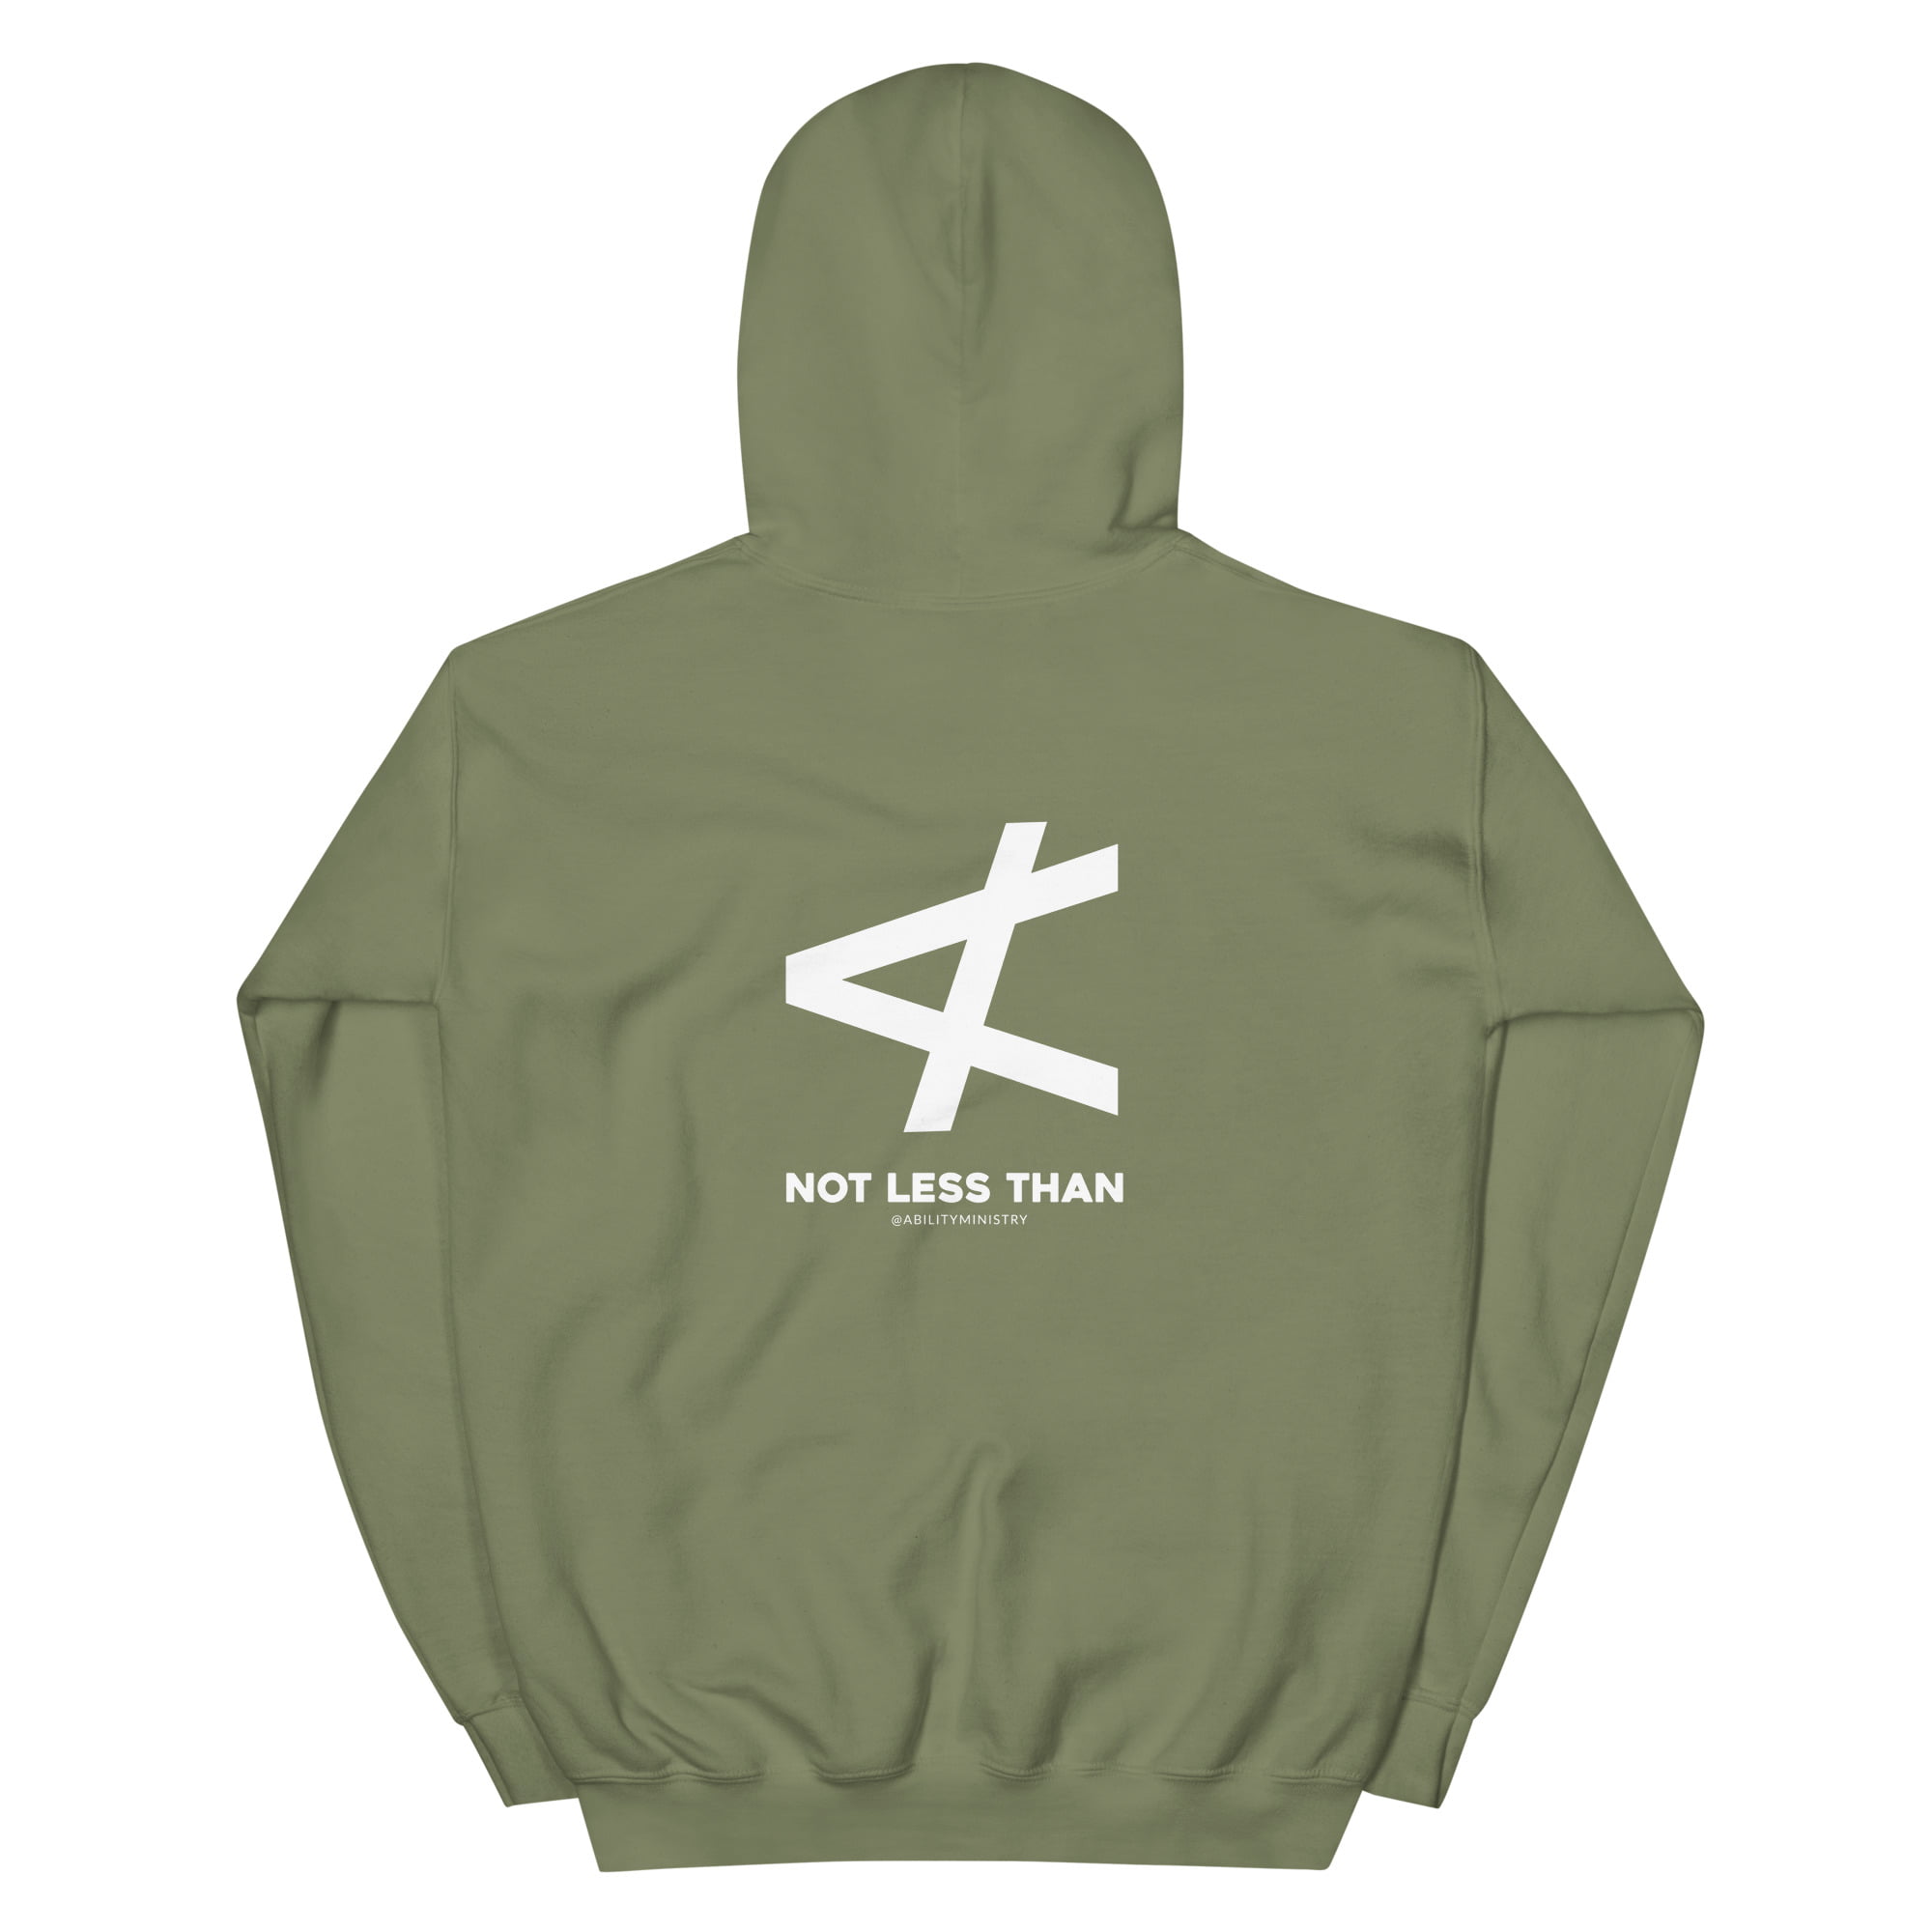 Product image for Not Less Than – Unisex Hoodie